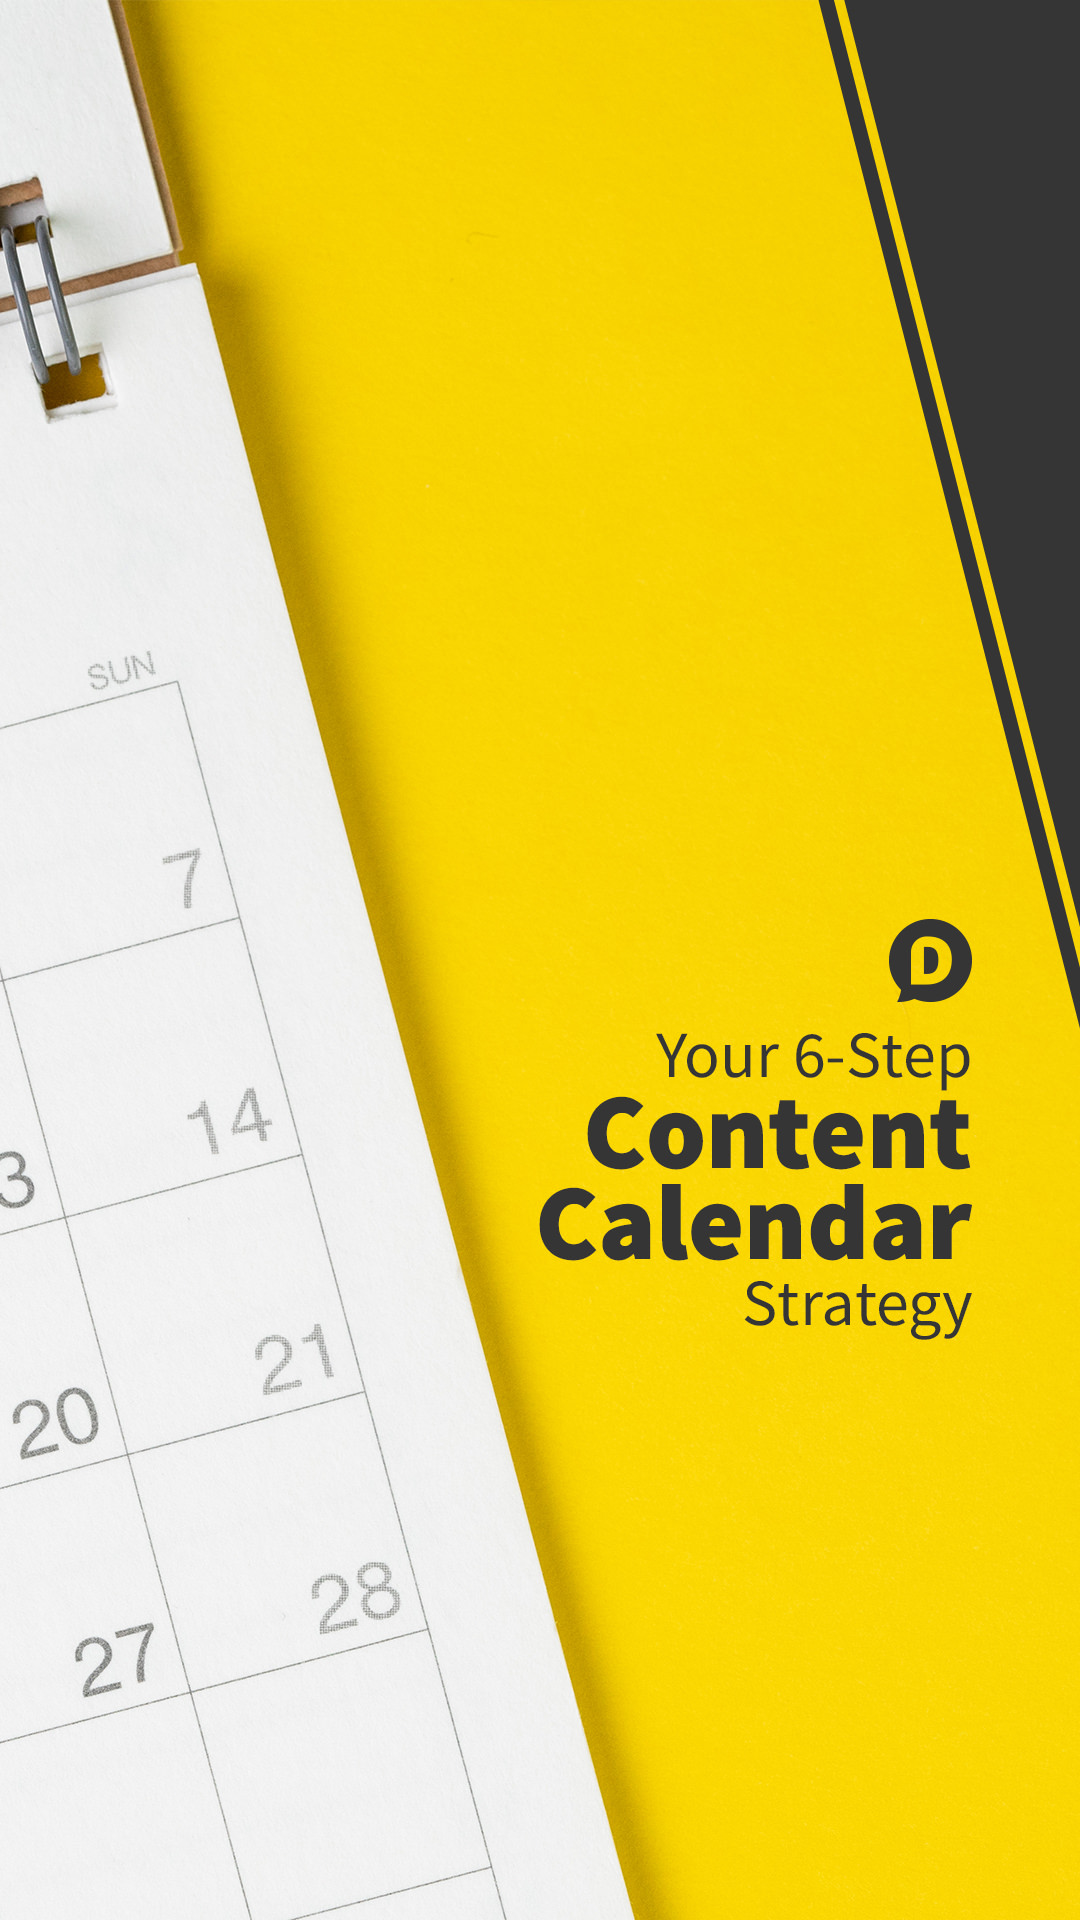 Your Content Calendar Strategy for 2021: Brilliantly Simple to Use